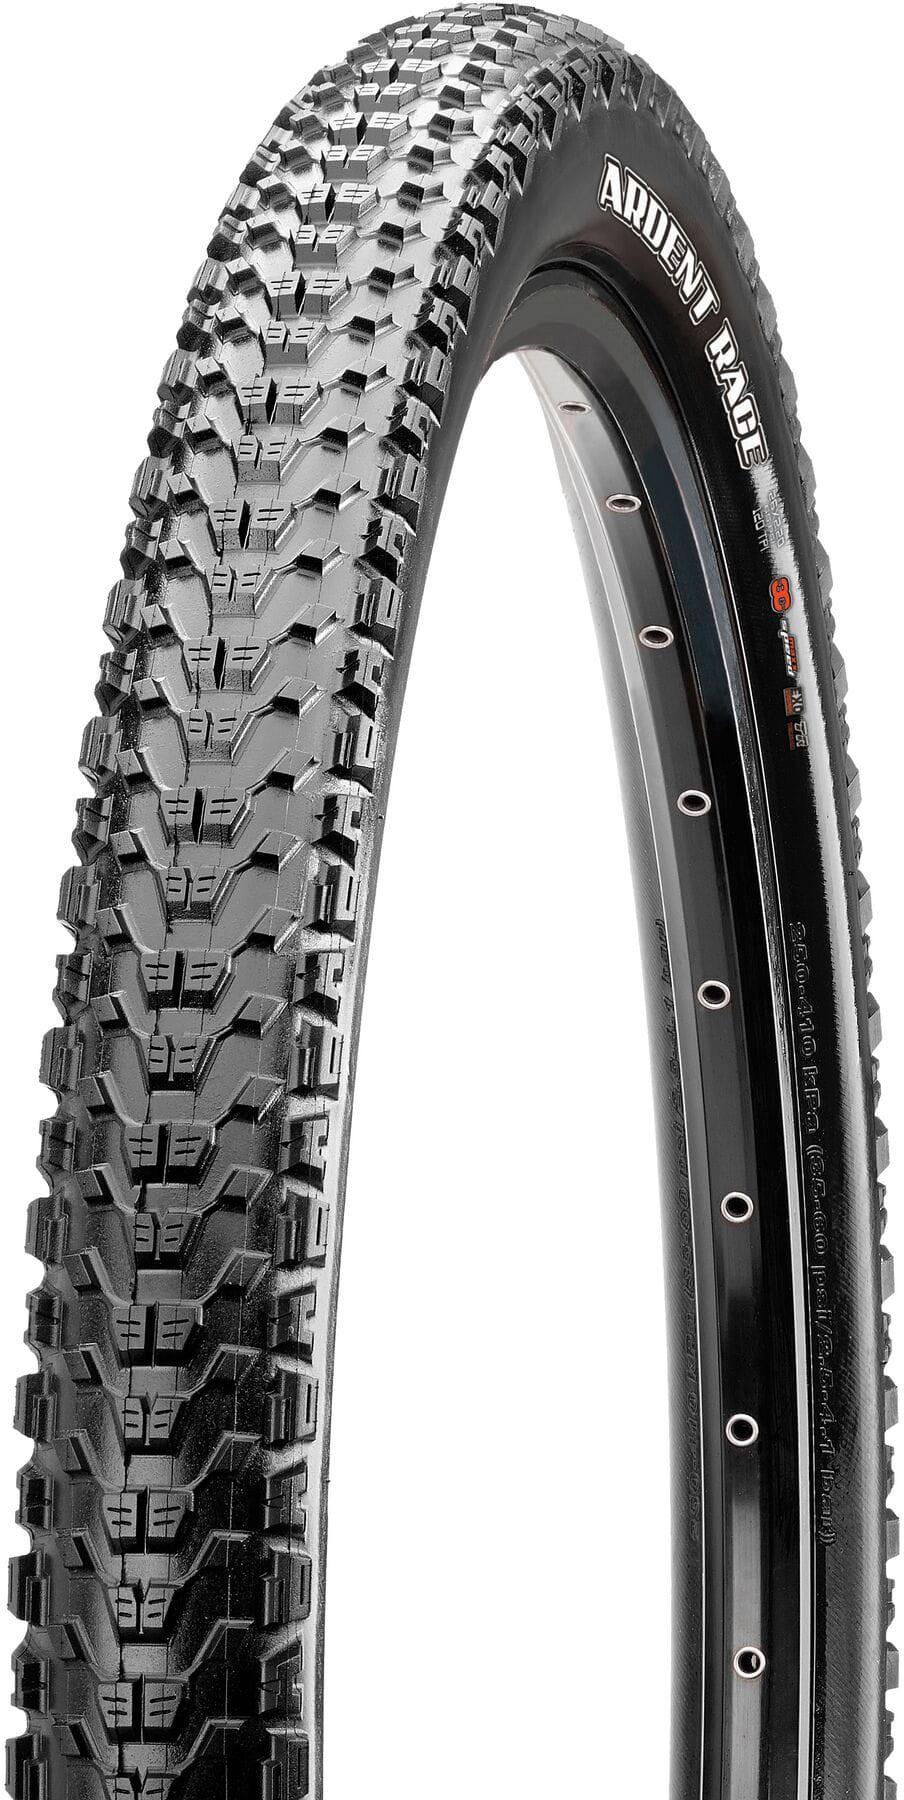 Maxxis Ardent 26 X 2.4  Bike Tyre, Dual Compound, Exo/Tr, 60 Tpi